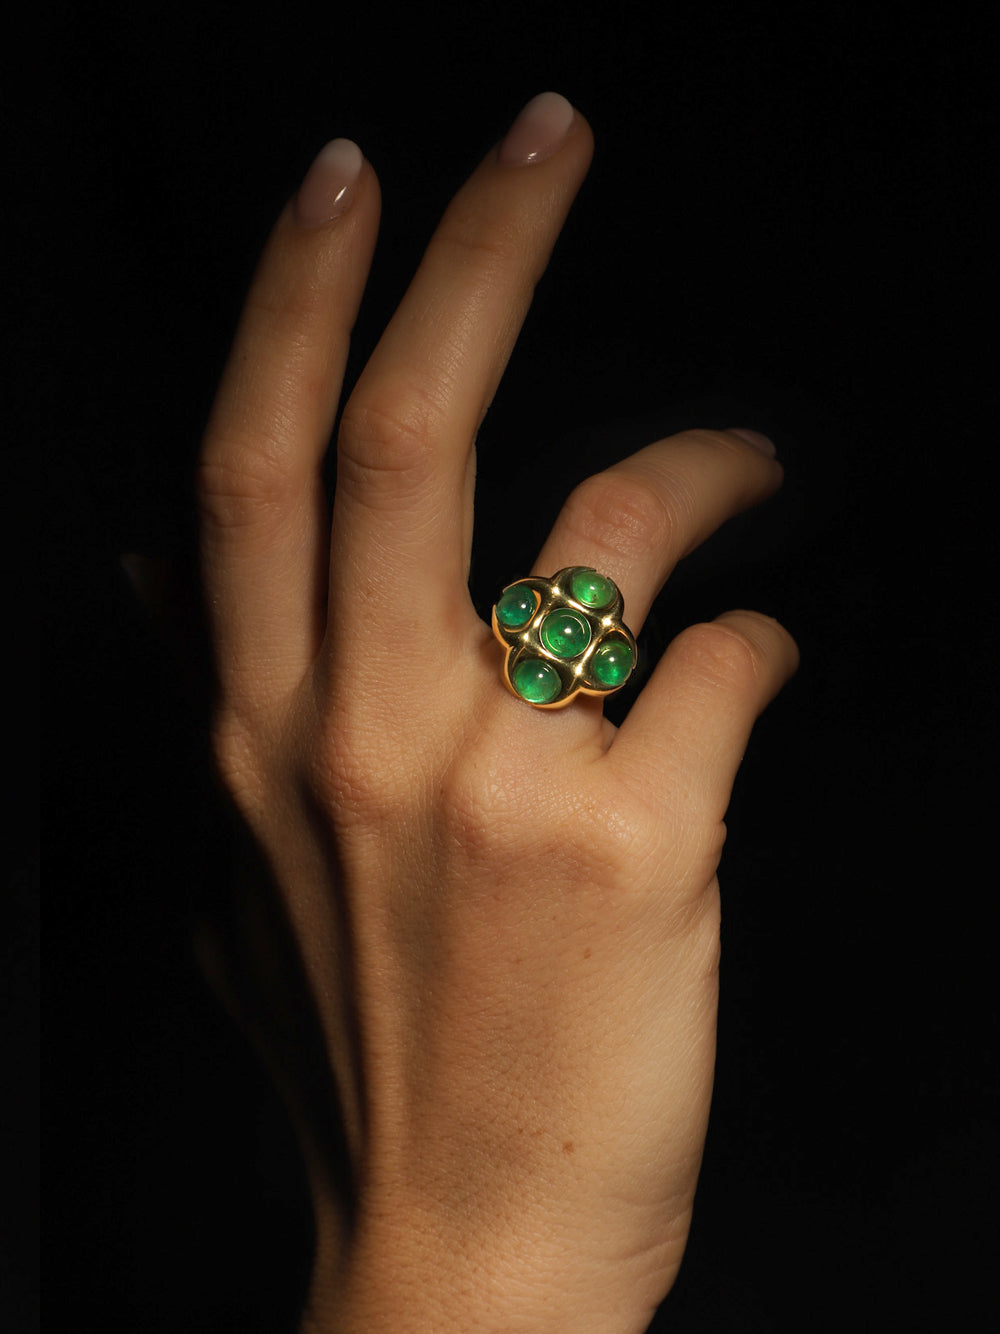 Emerald horns ring by deisgner Solange Azagury-Partridge, 18k Yellow Gold and Emerald - on model shot